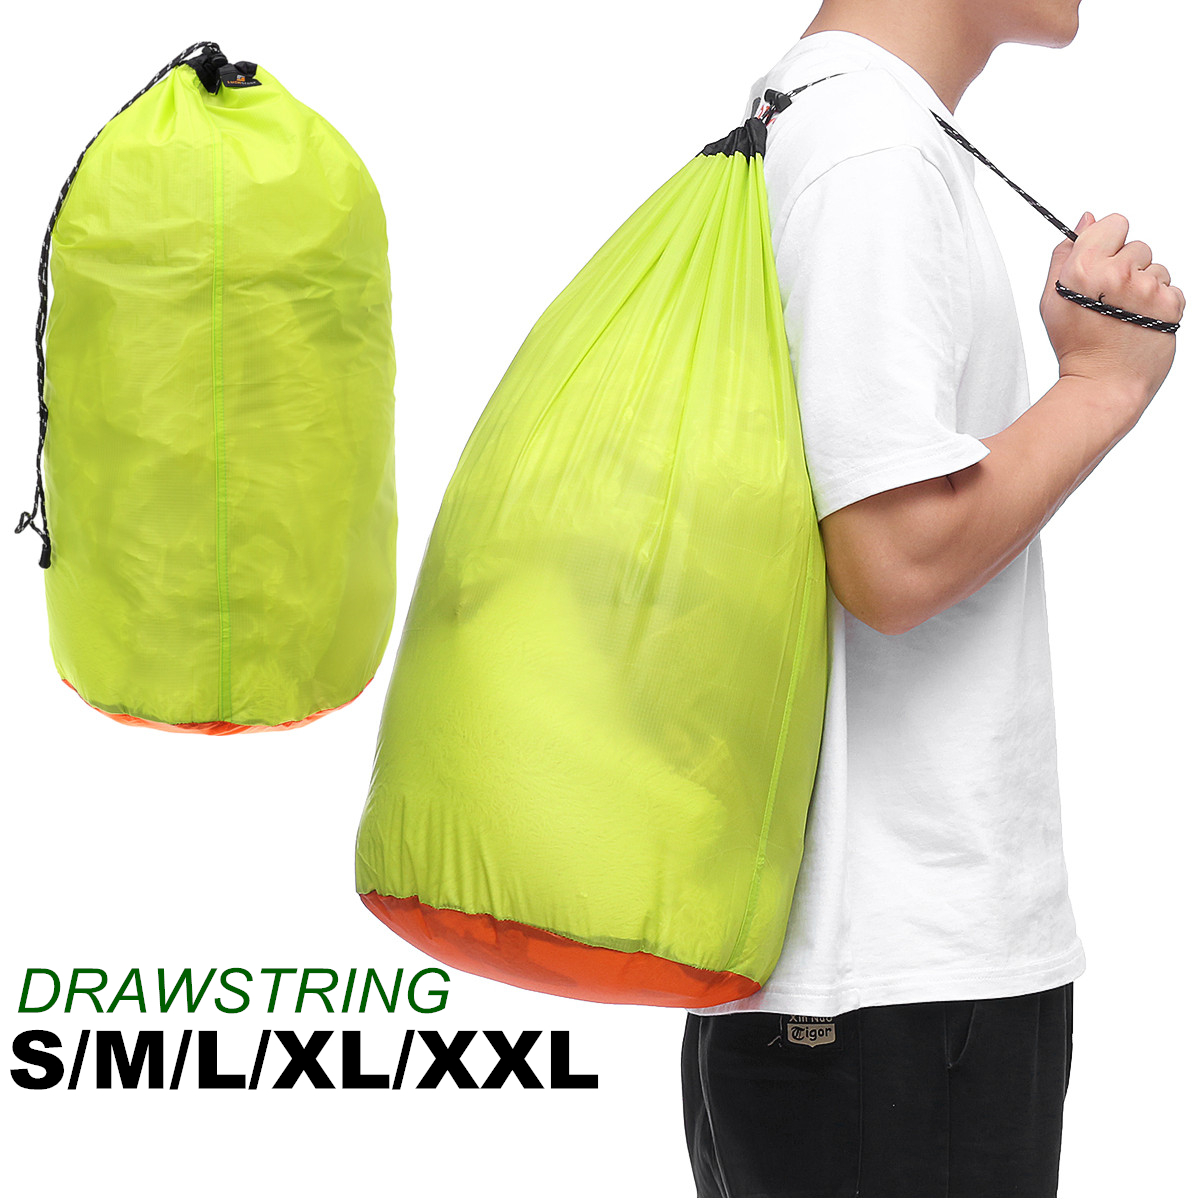 Portable-Drawstring-Storage-Bag-Outdoor-Waterproof-Traveling-Clothes-Shoes-Bag-SMLXL2XL-1555374-10